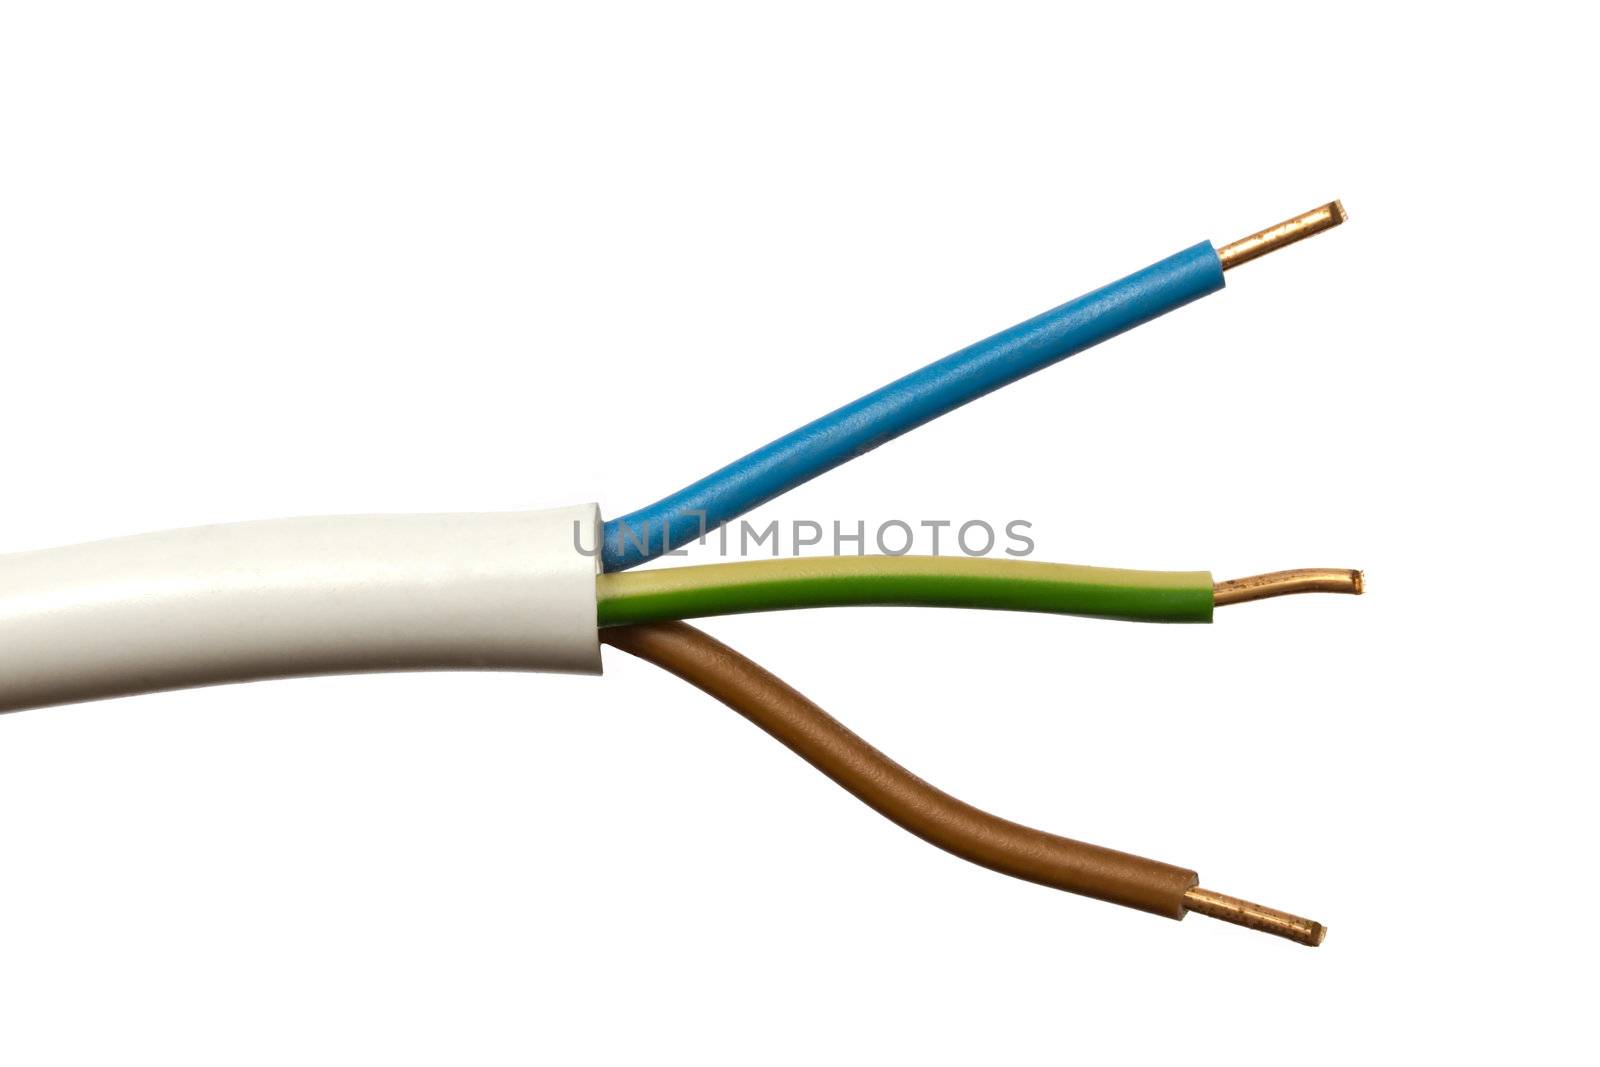  colorful electrical wire  by ibphoto